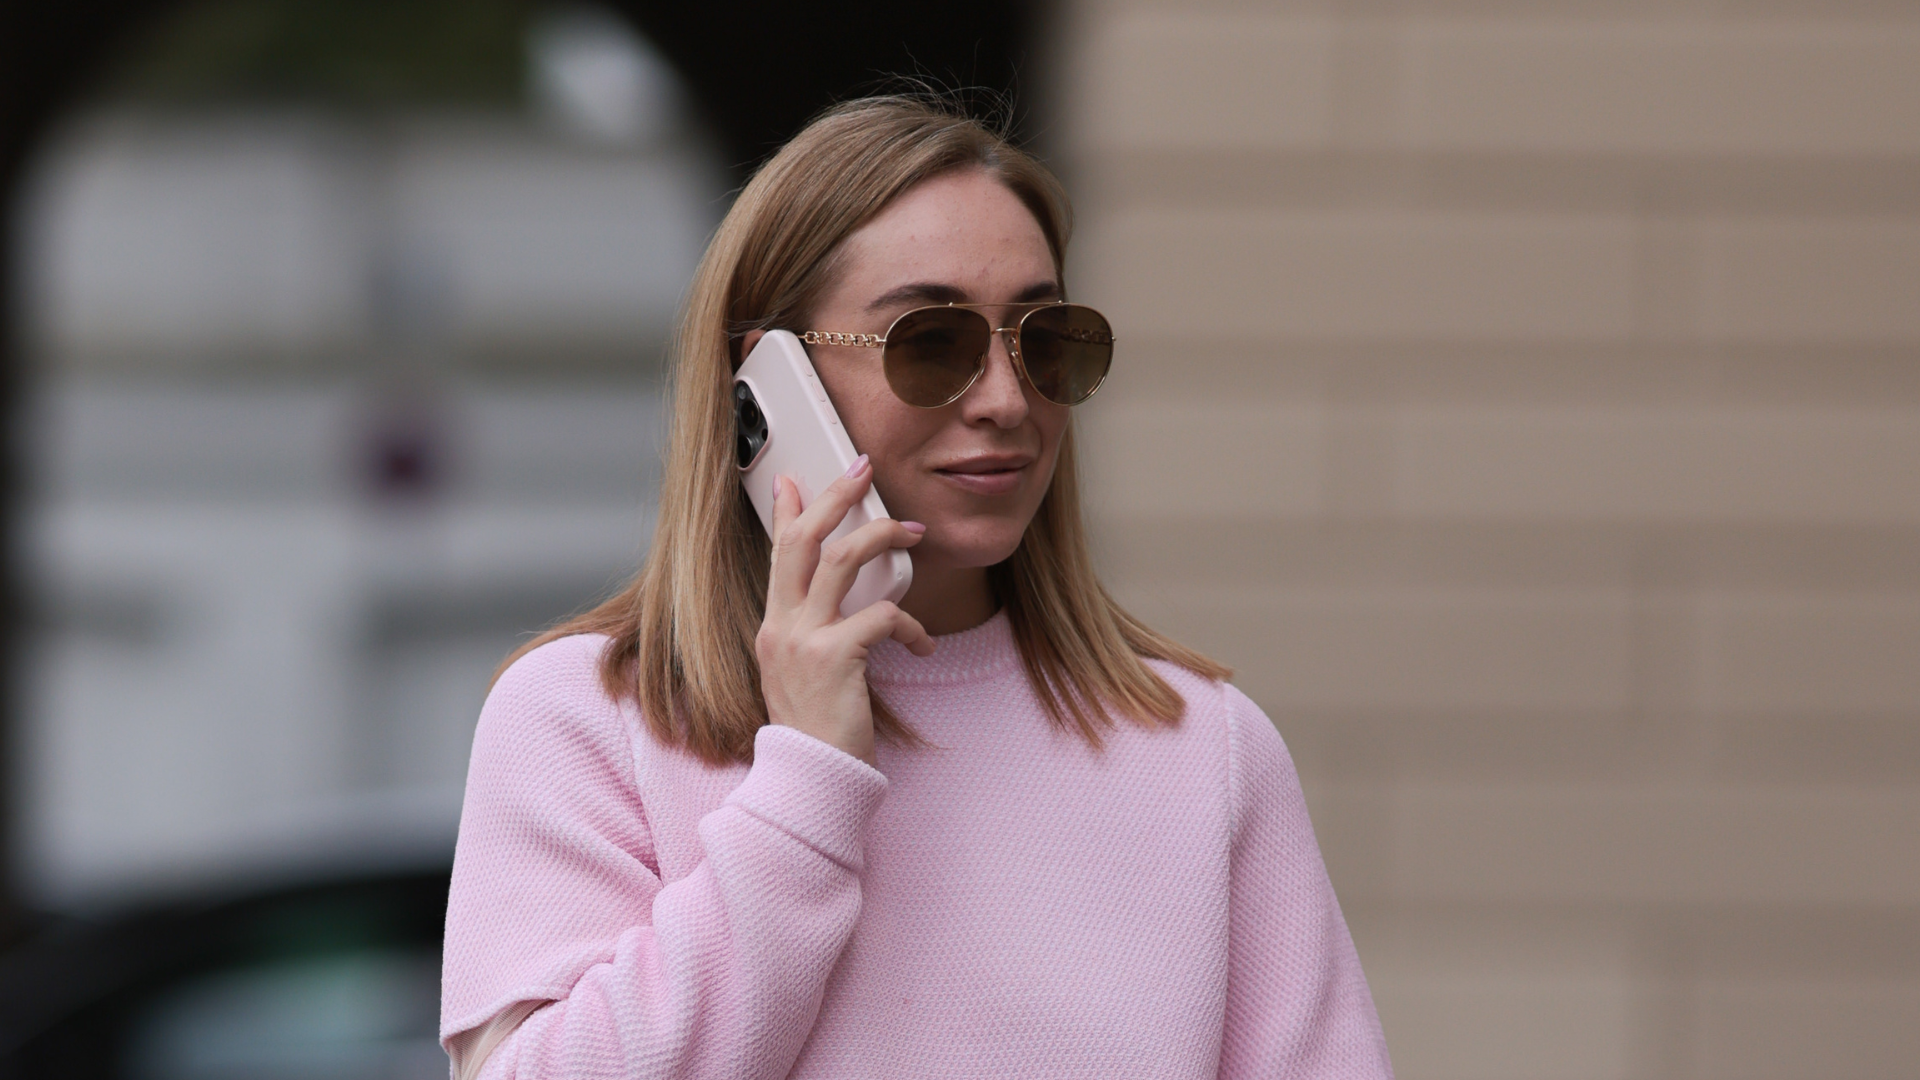 A woman wearing a pink sweater and sunglasses holds a phone to her ear.